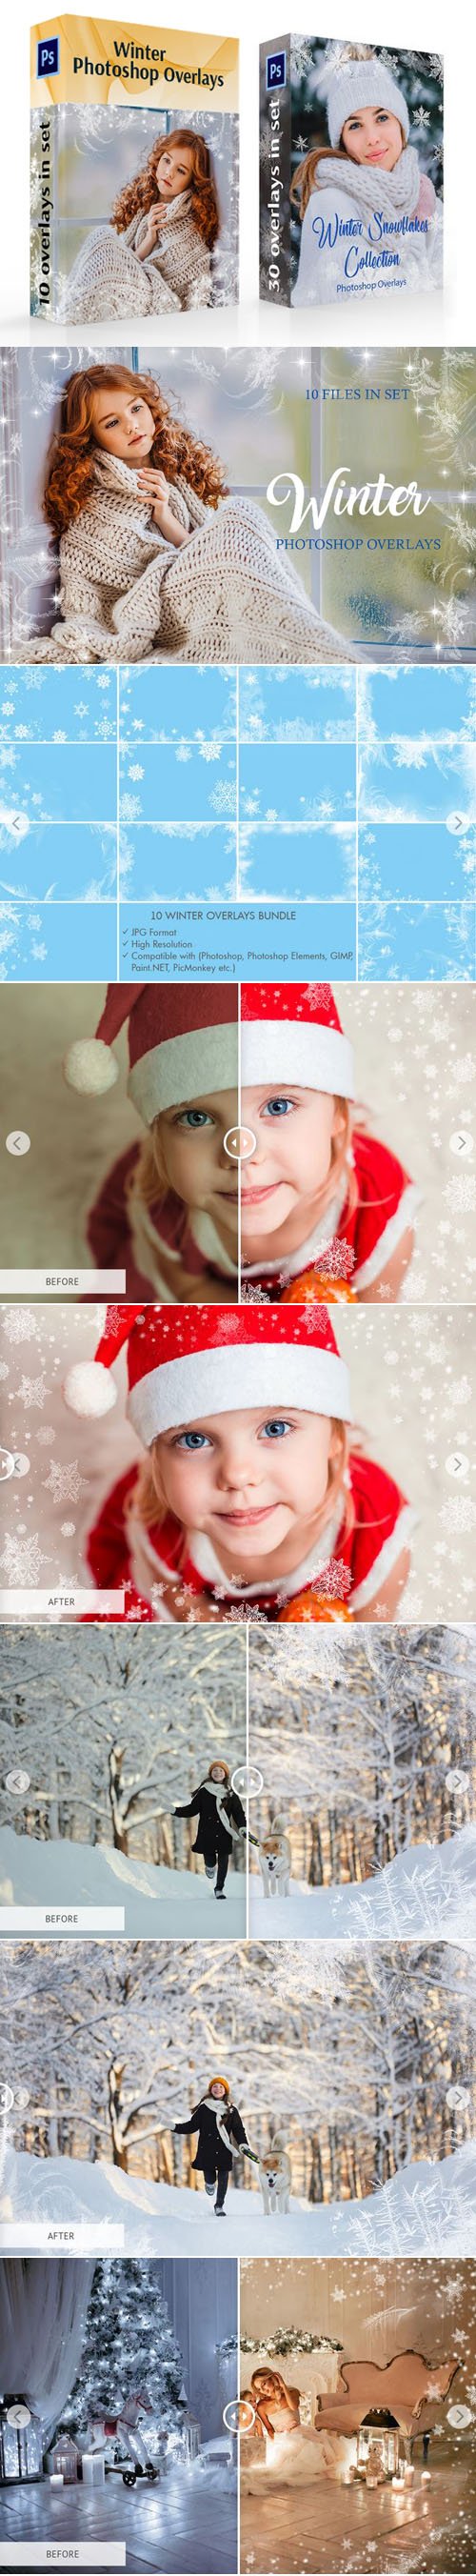 10 Winter Overlays Collection for Photoshop